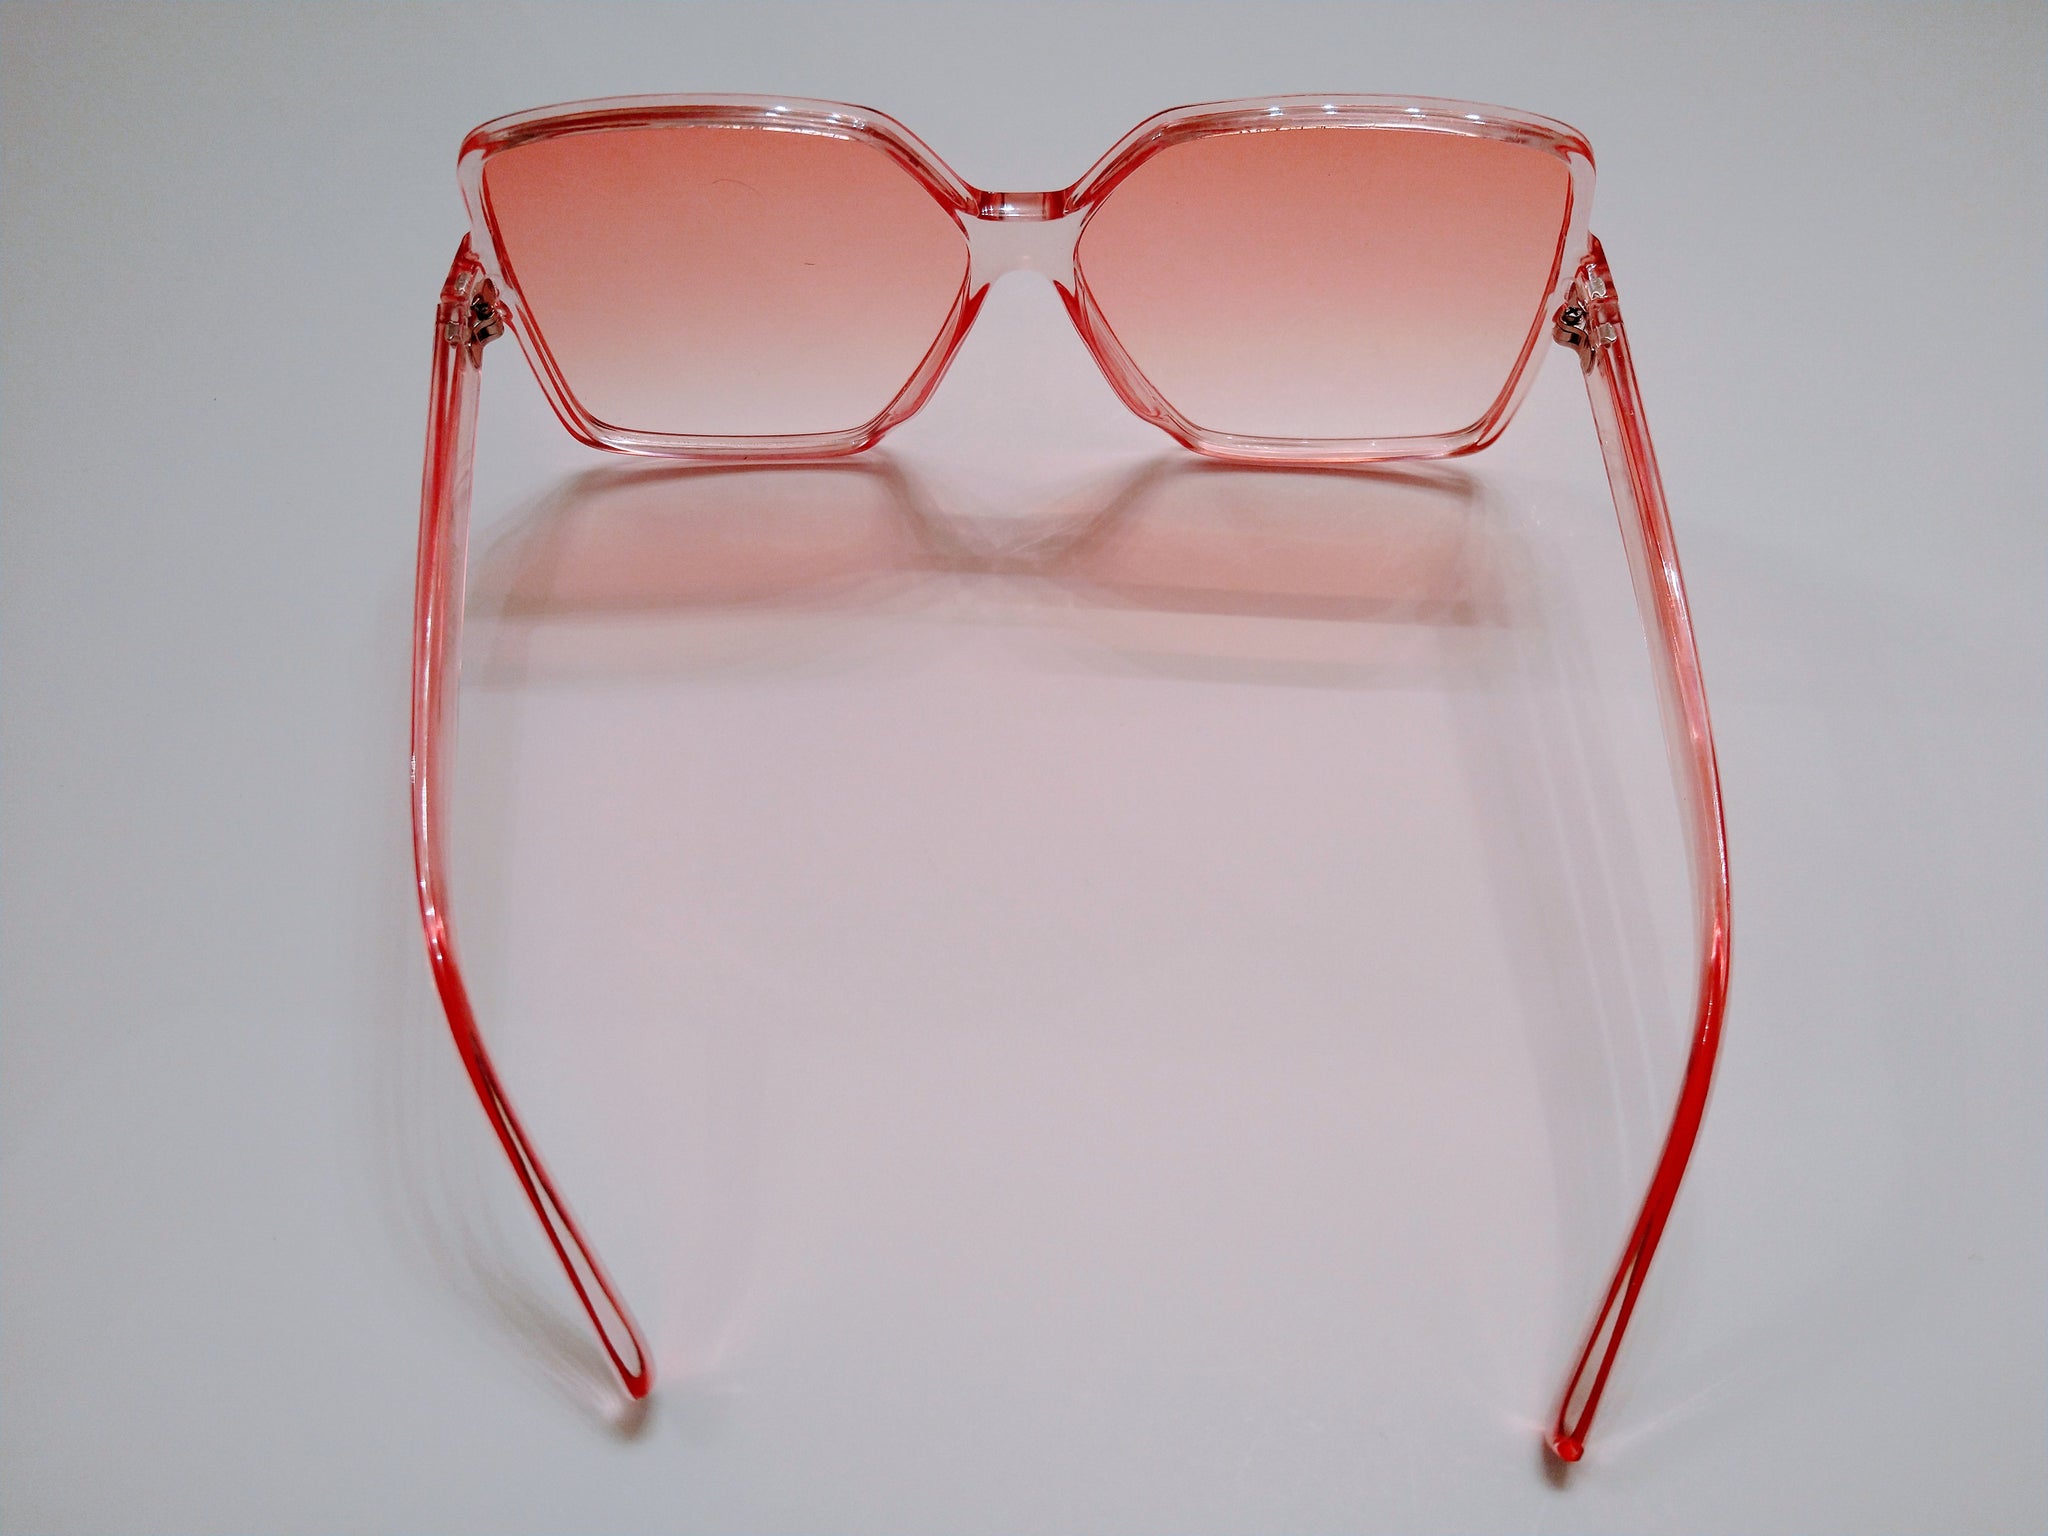 Push Pink Over sized sunglasses - HPK Personalized Products and more